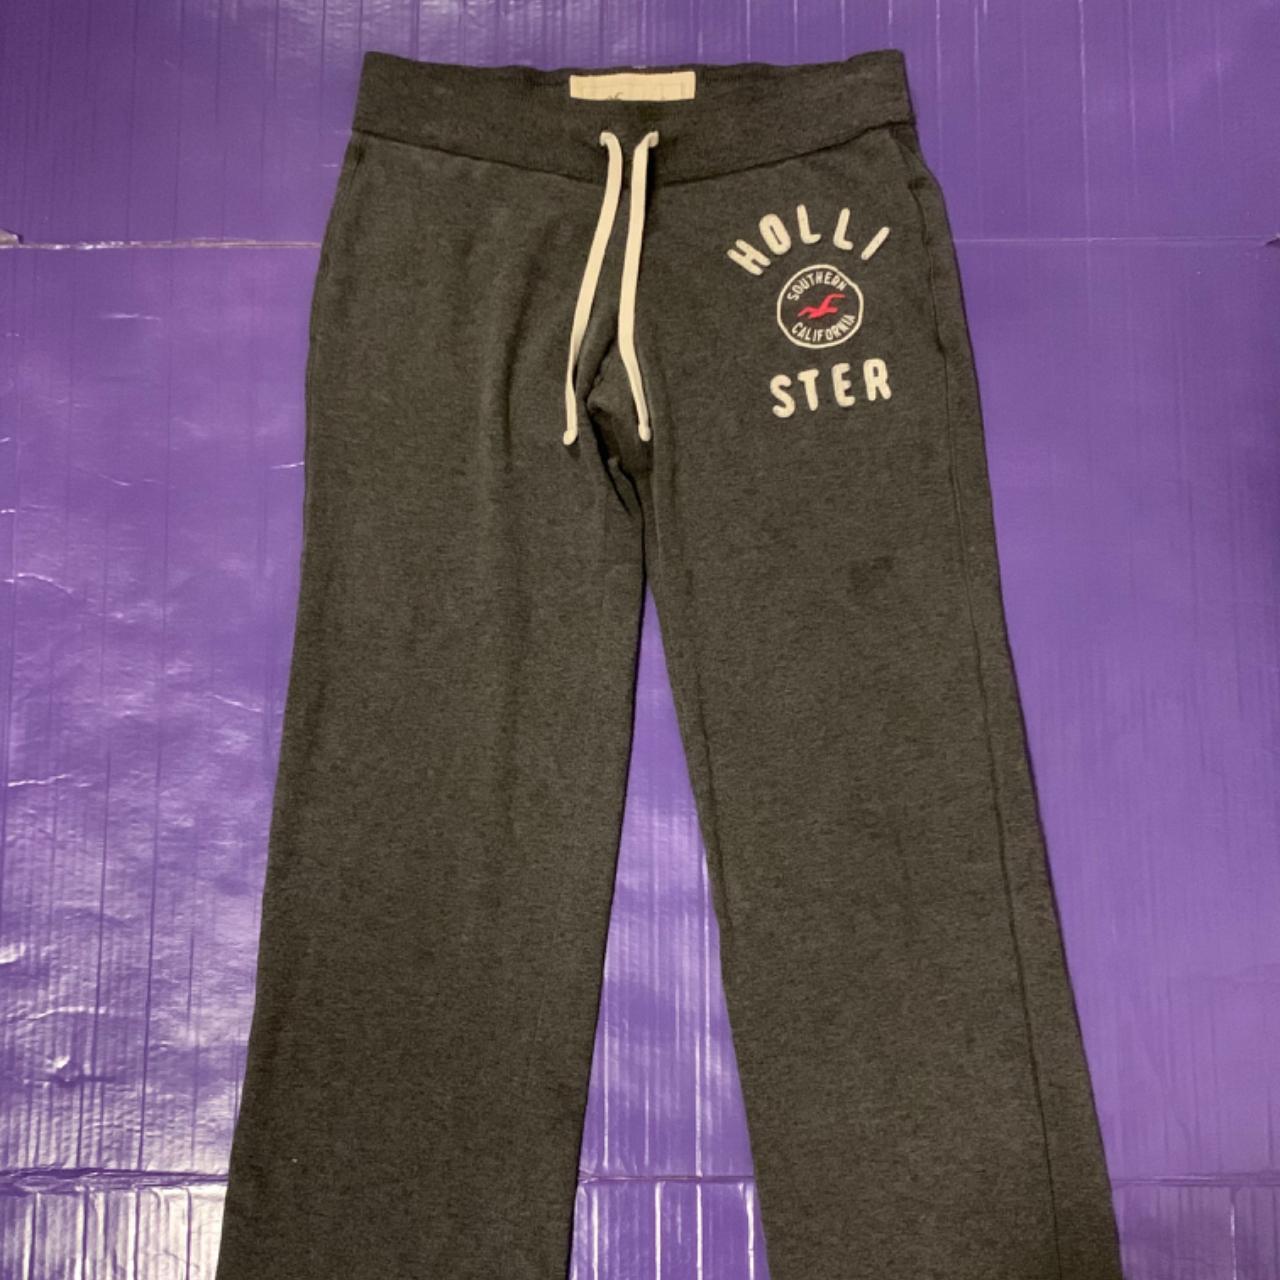 Hollister grey sweatpants. Low rise and bootcut. Has... - Depop